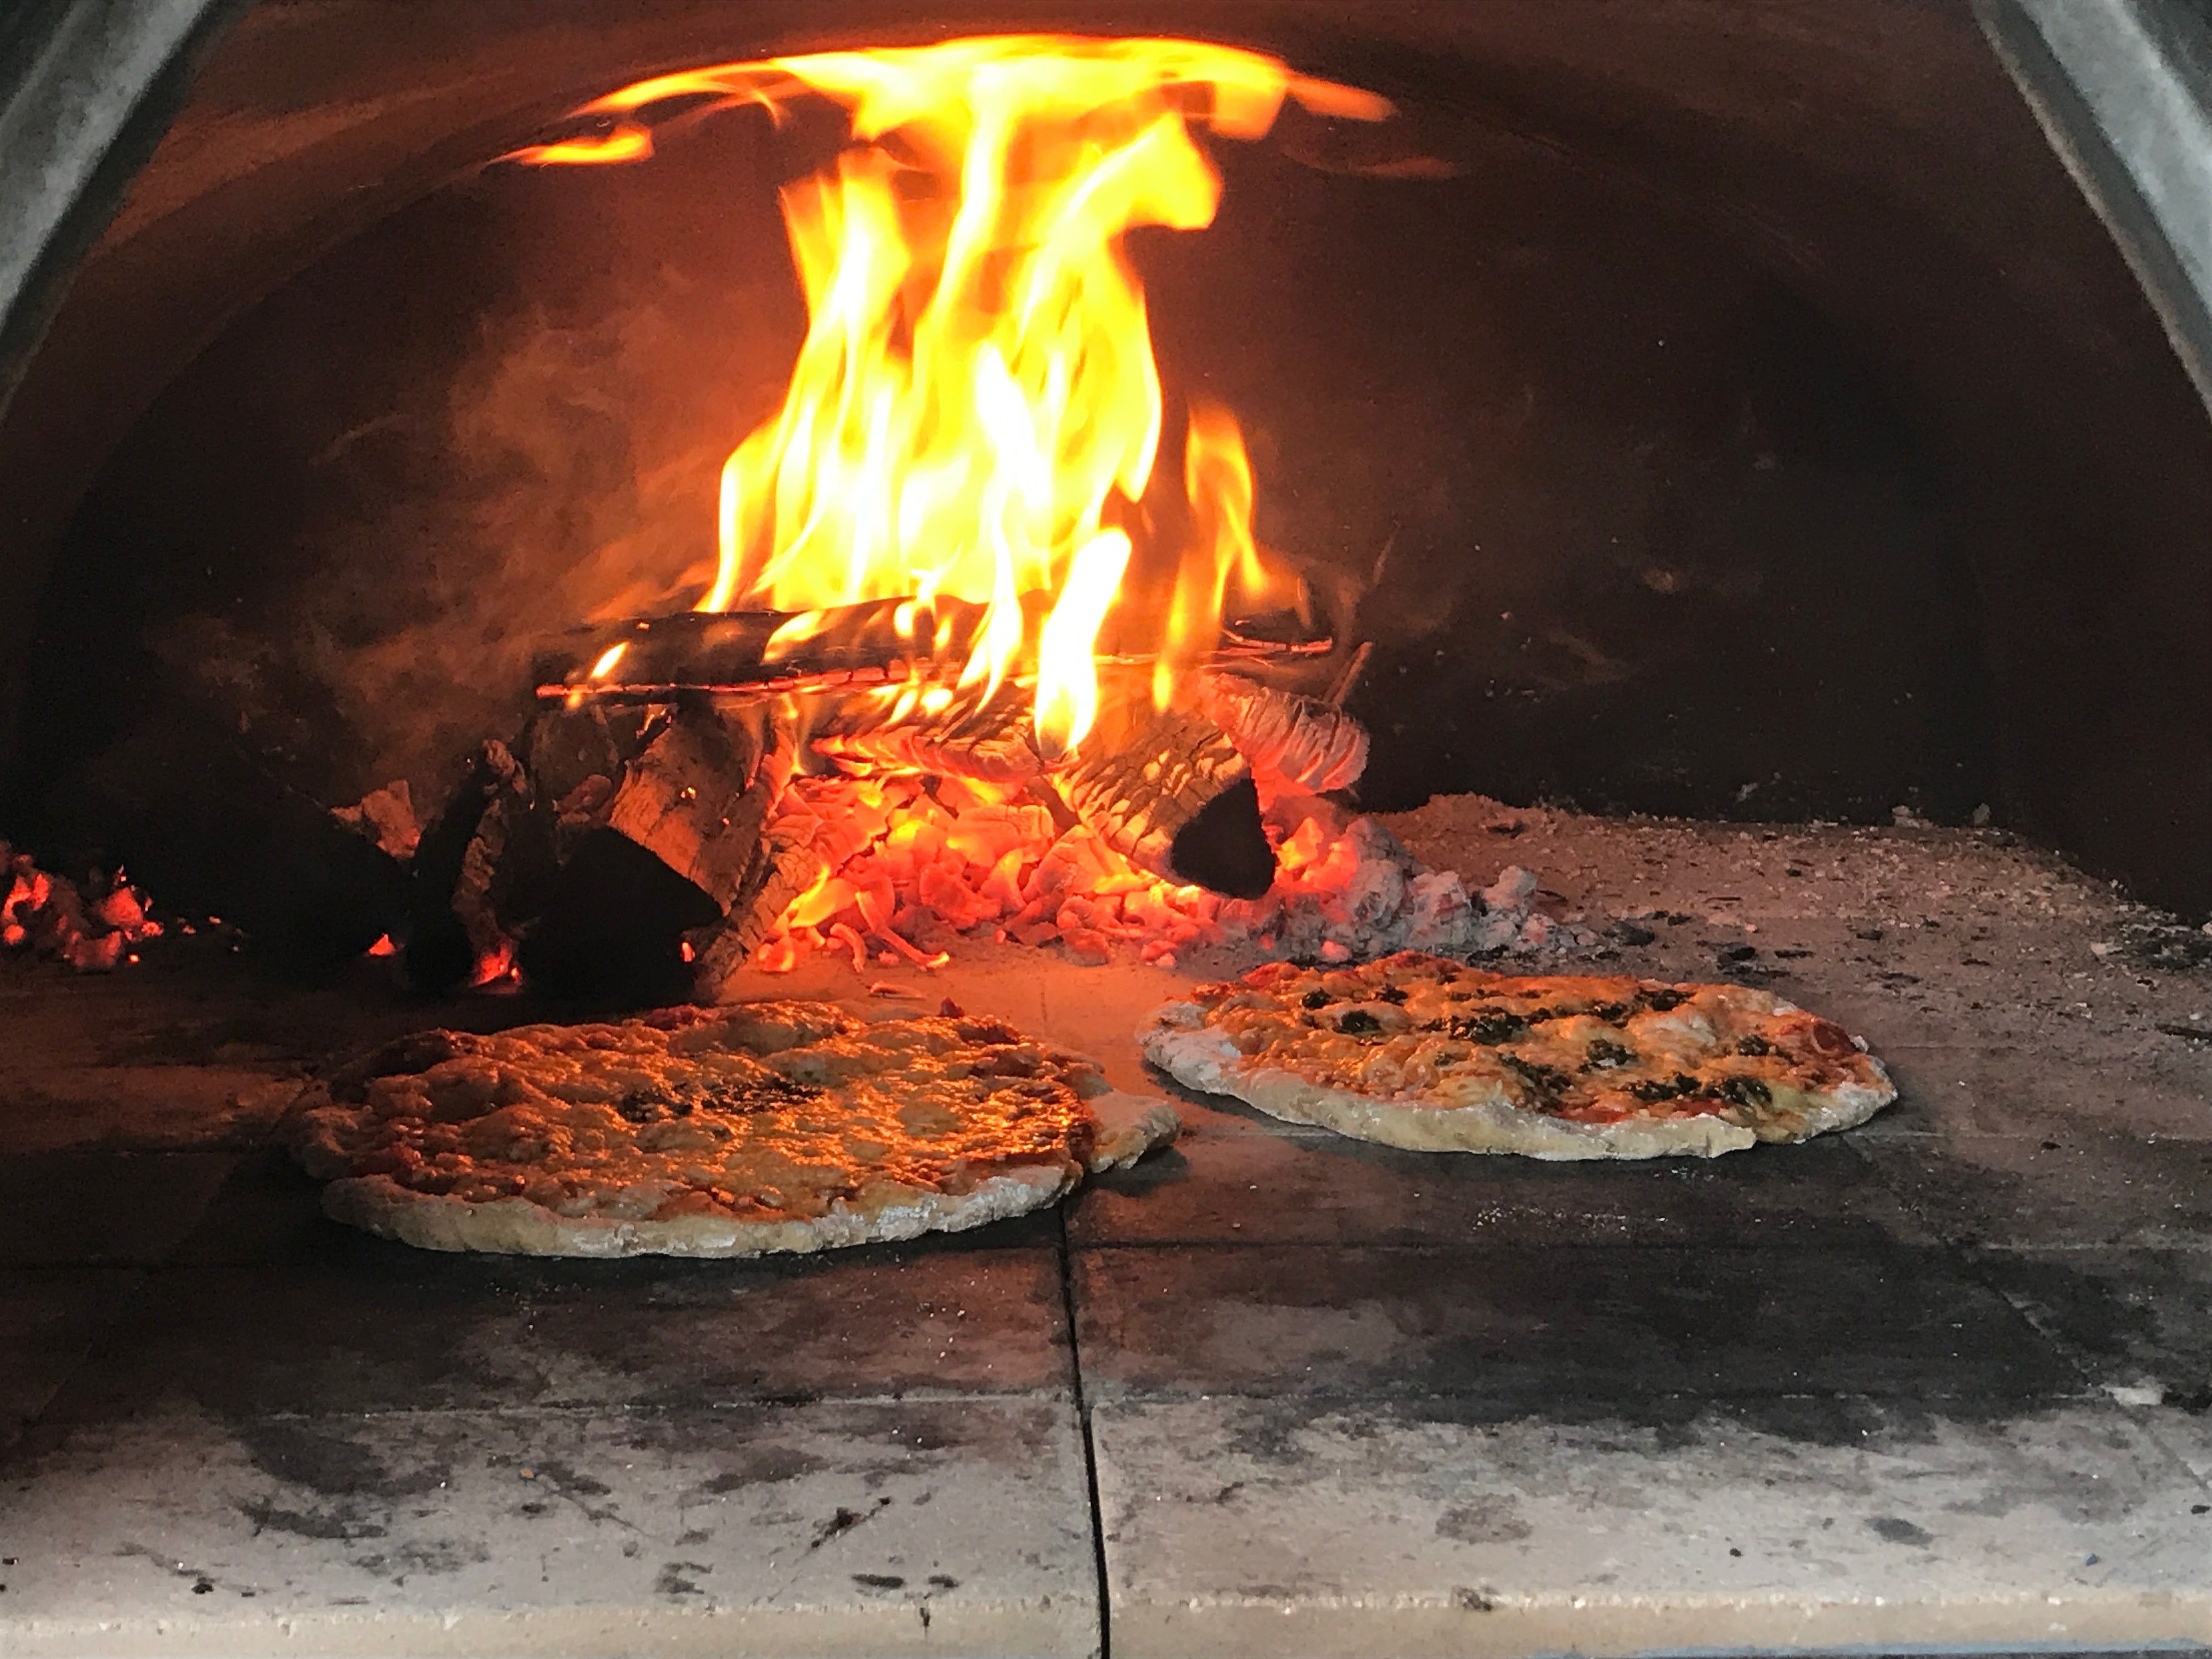 Two pizzas cooking in a large wood burning pizza oven